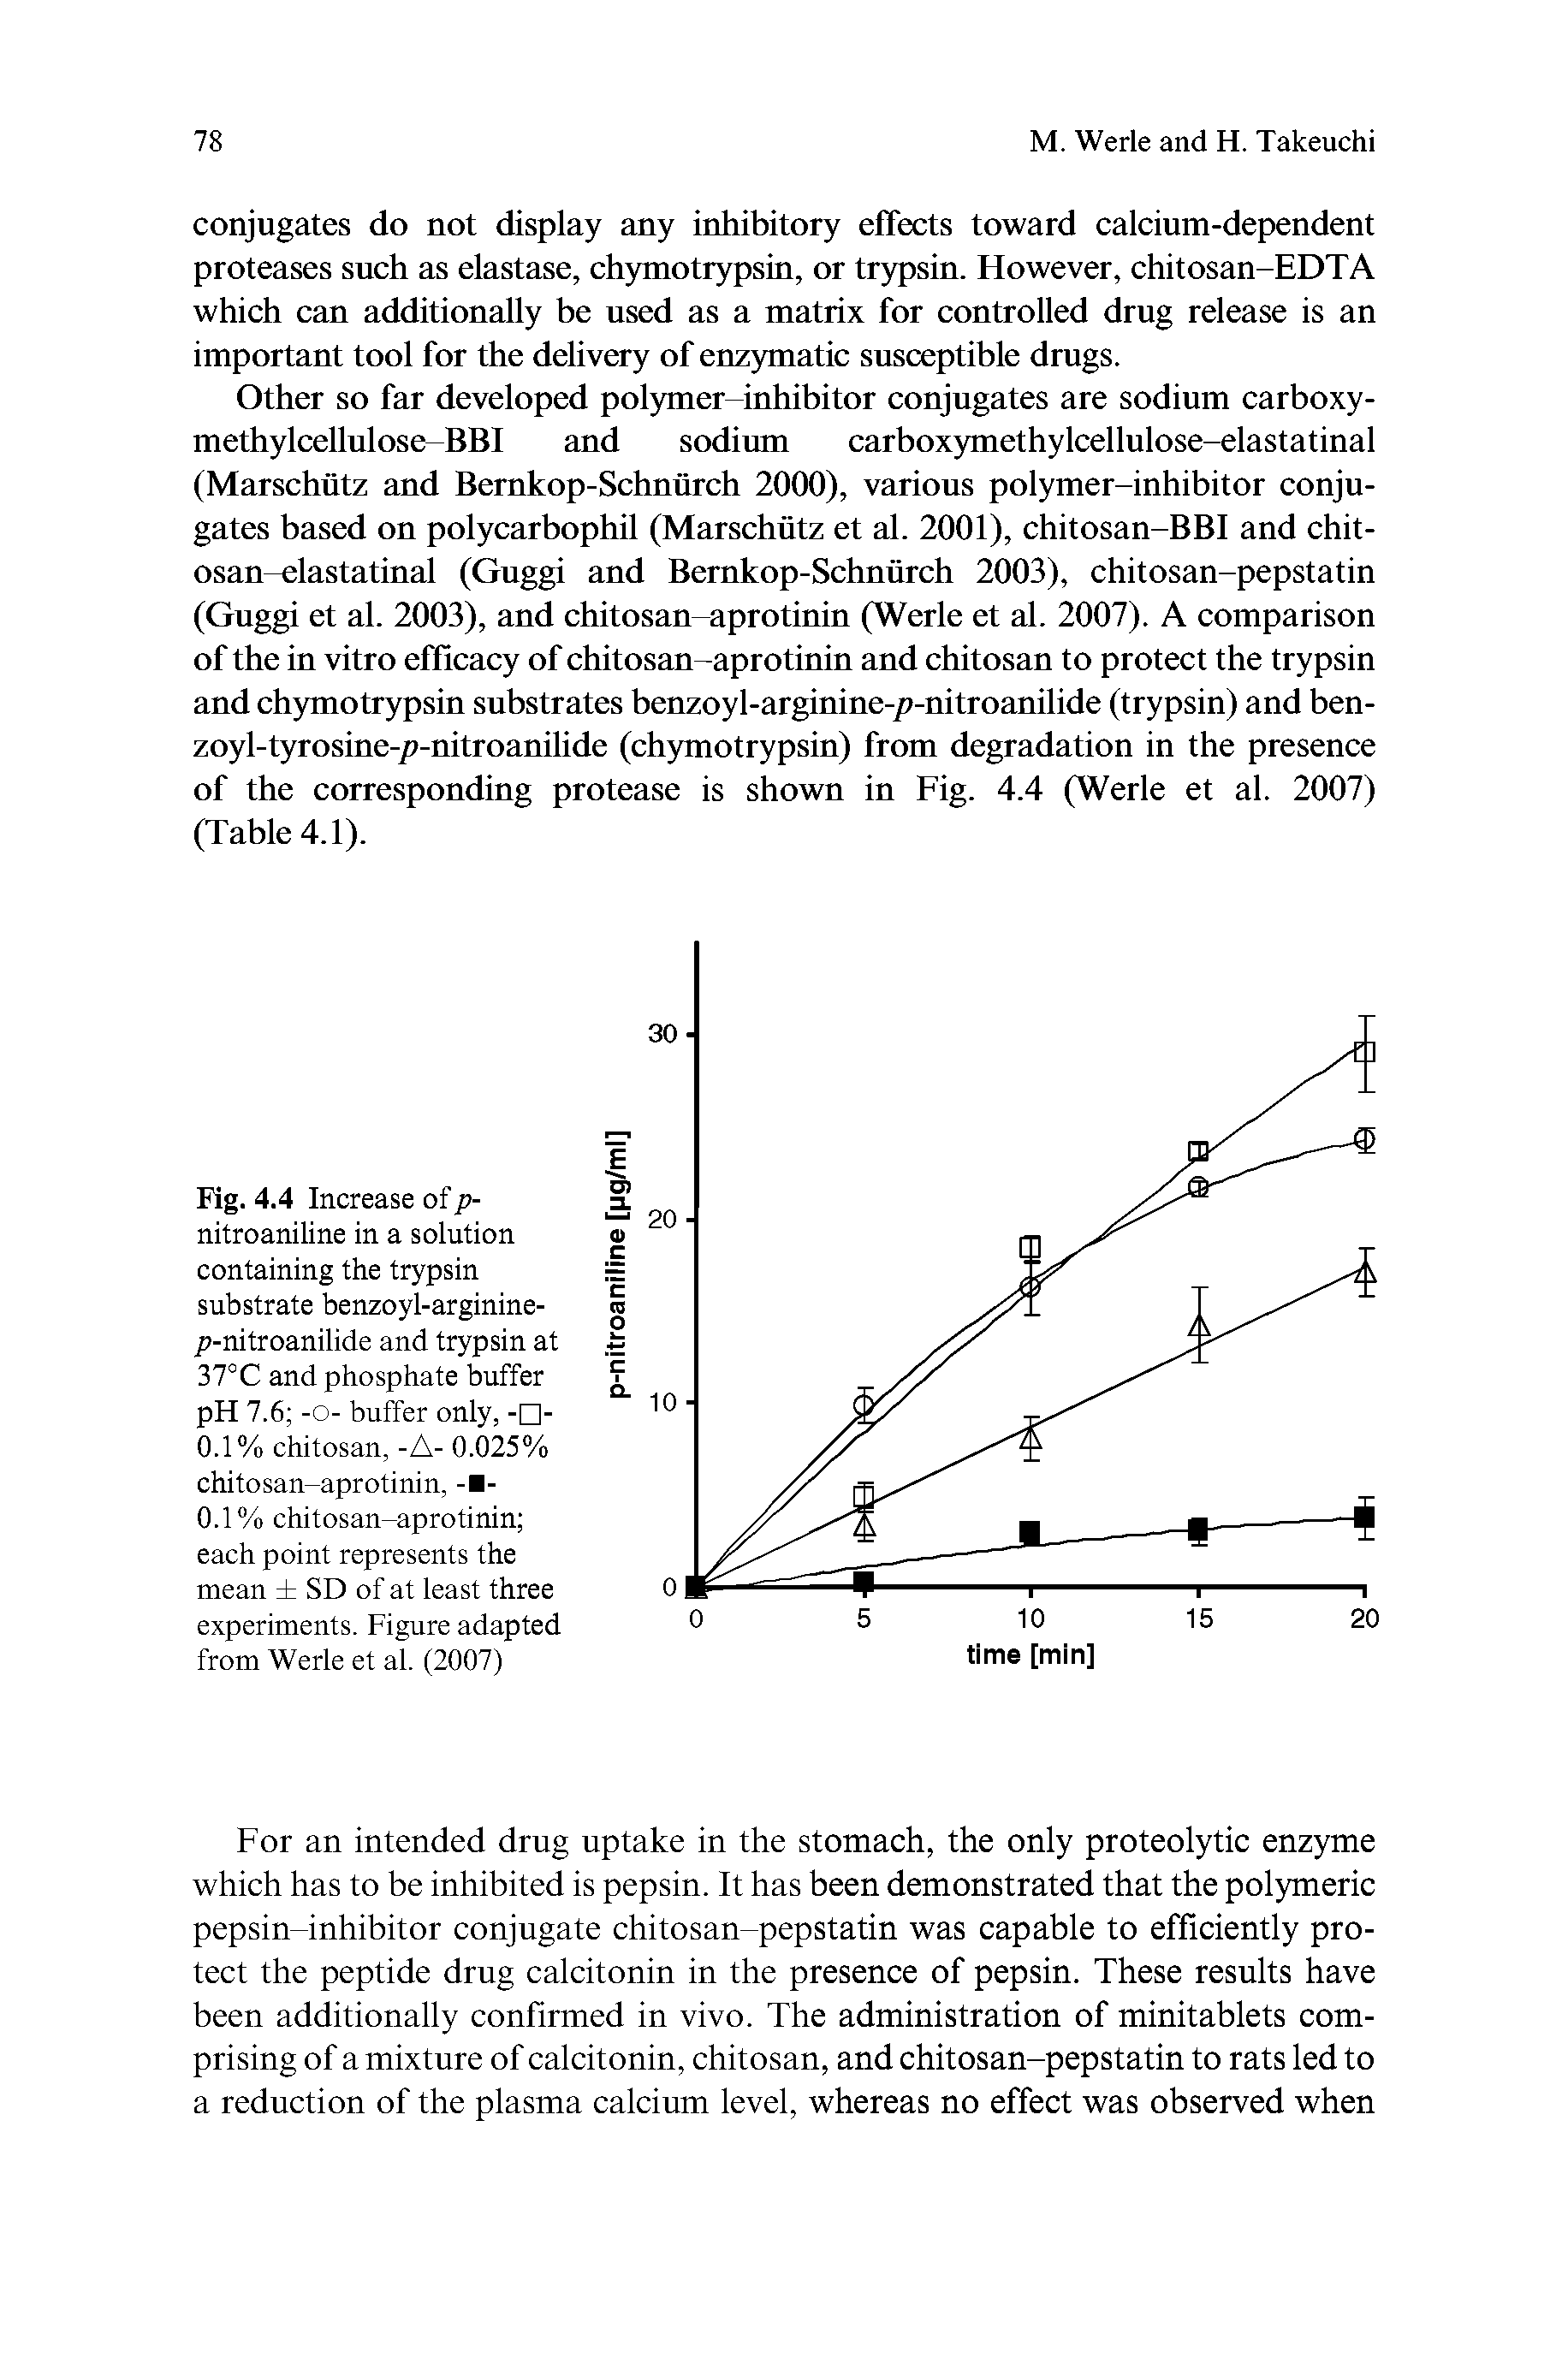 Fig. 4.4 Increase of p-nitroaniline in a solution containing the trypsin substrate benzoyl-arginine-p-nitroanilide and trypsin at 37°C and phosphate buffer pH 7.6 -o- buffer only, - -0.1% chitosan, -A- 0.025% chitosan-aprotinin,...